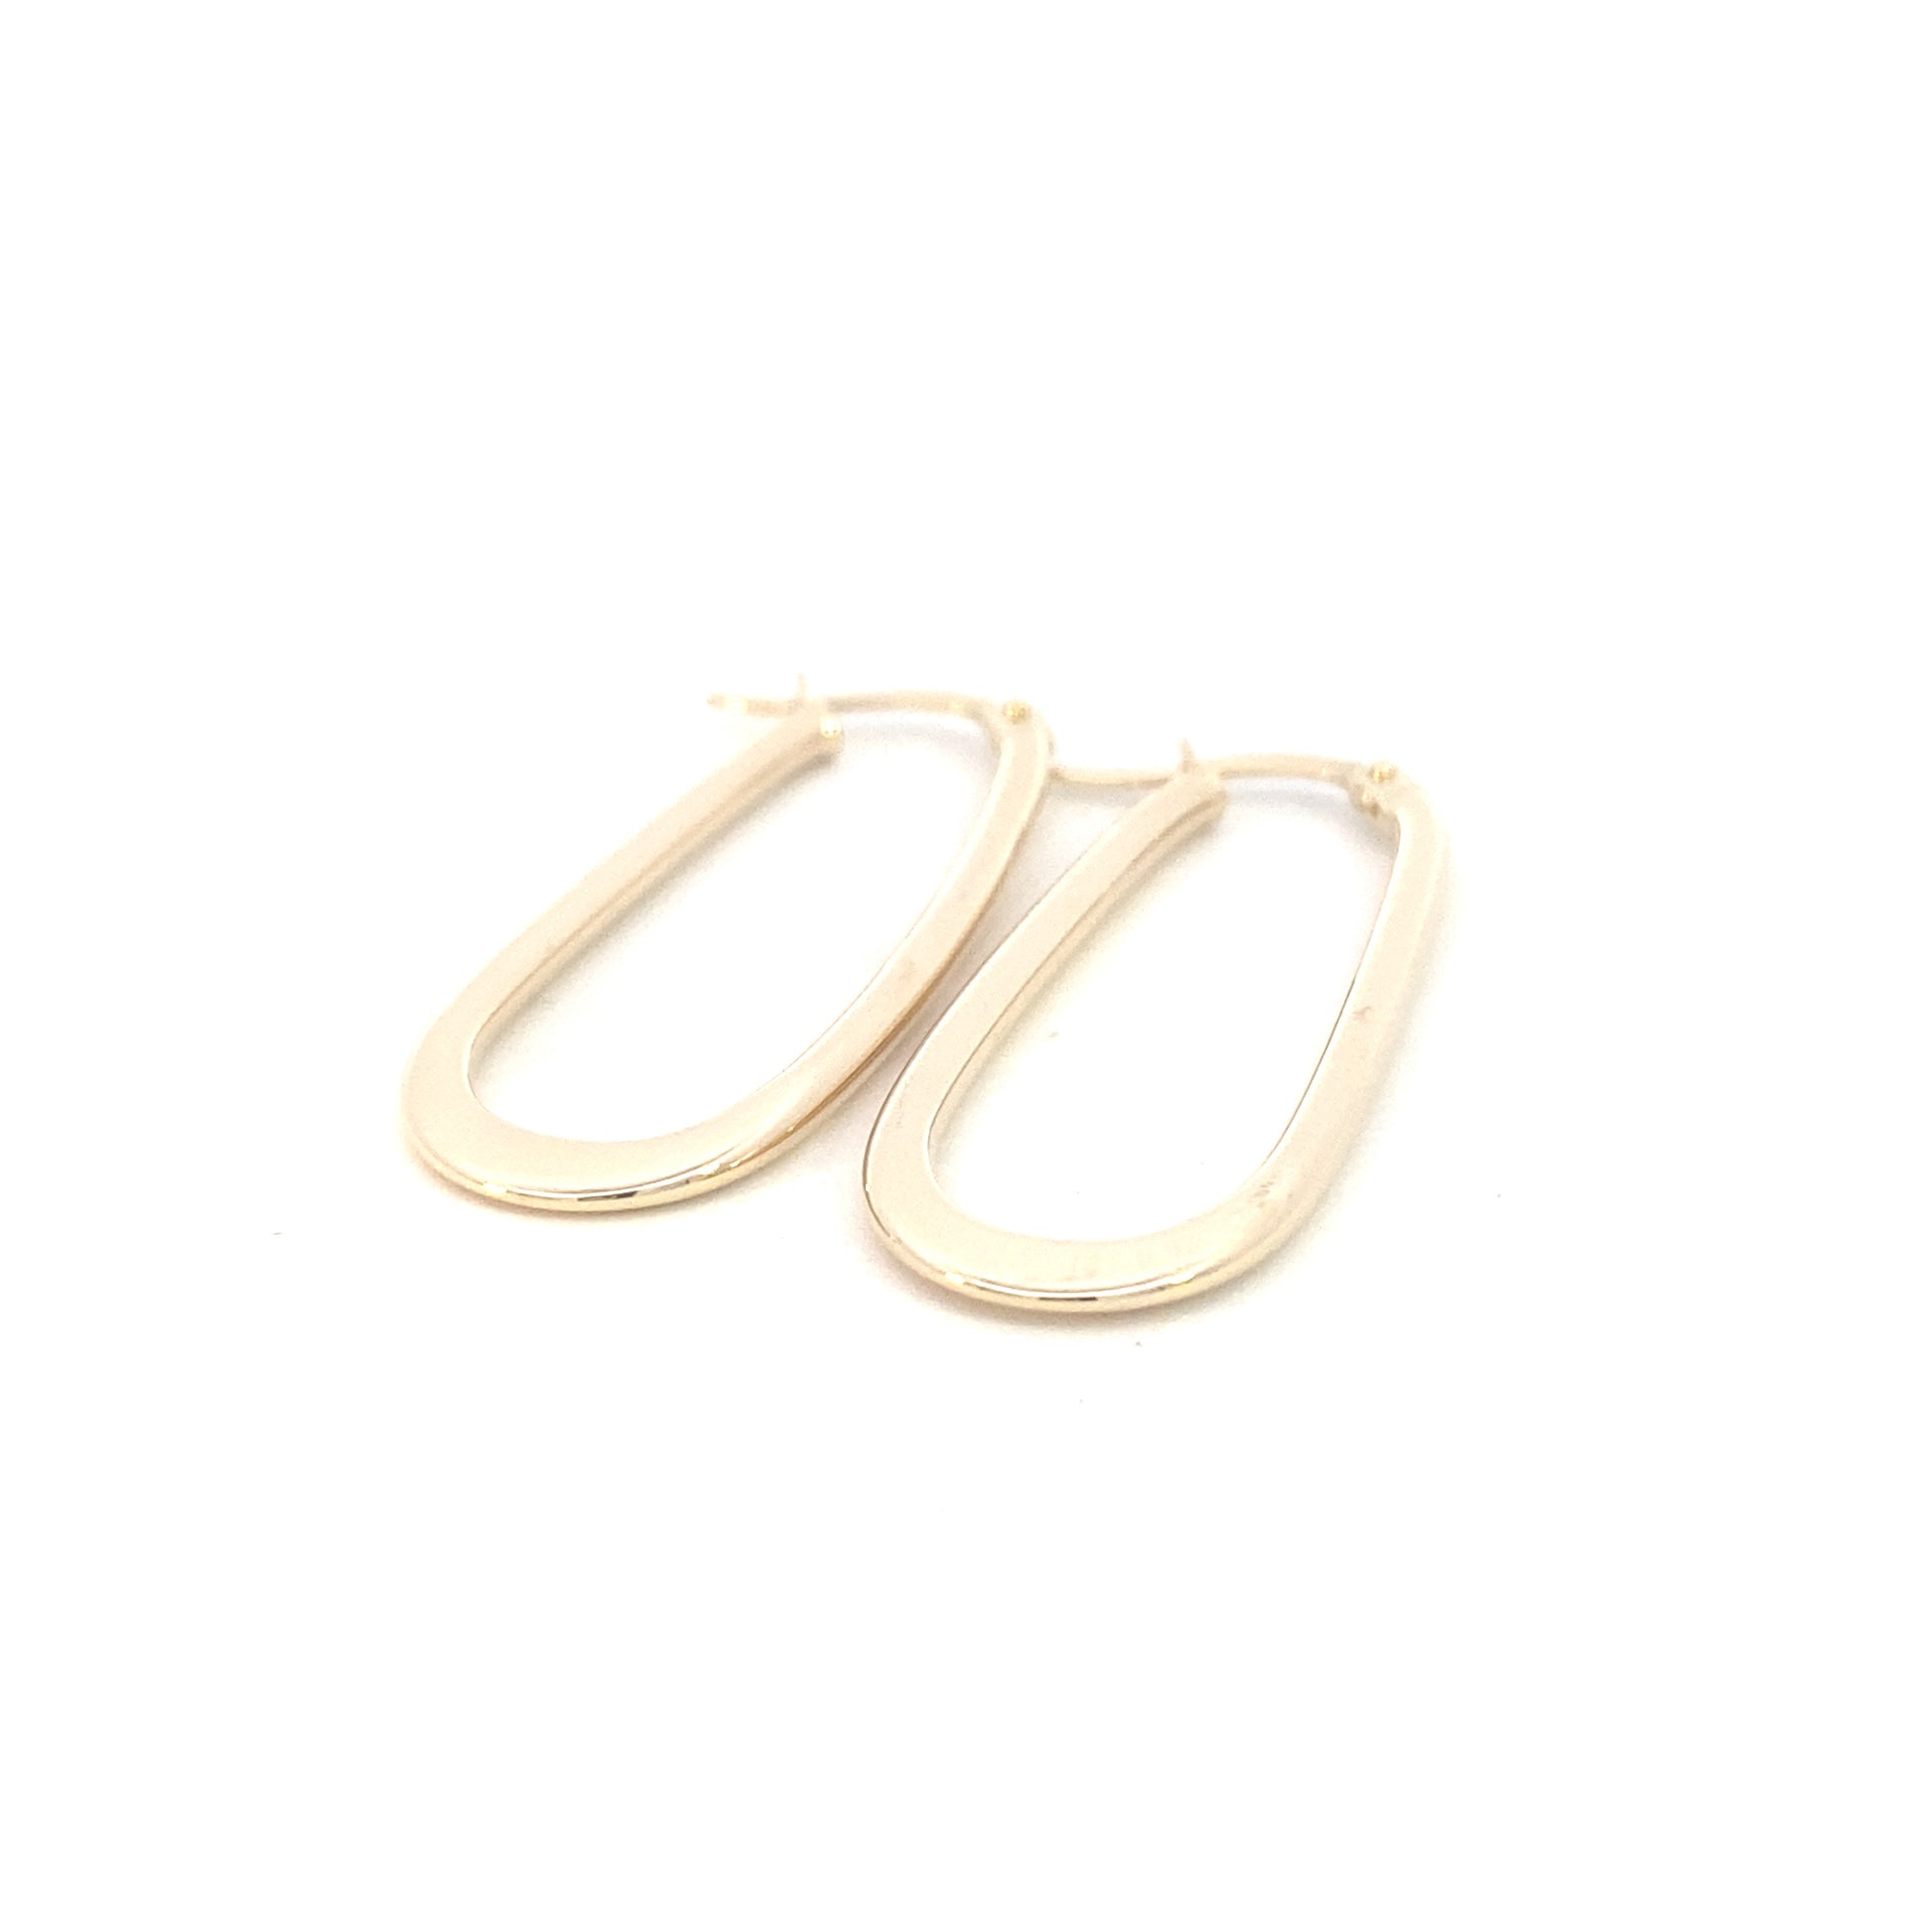 14K Gold Long Oval Earrings Hoops | Luby Gold Collection | Luby 